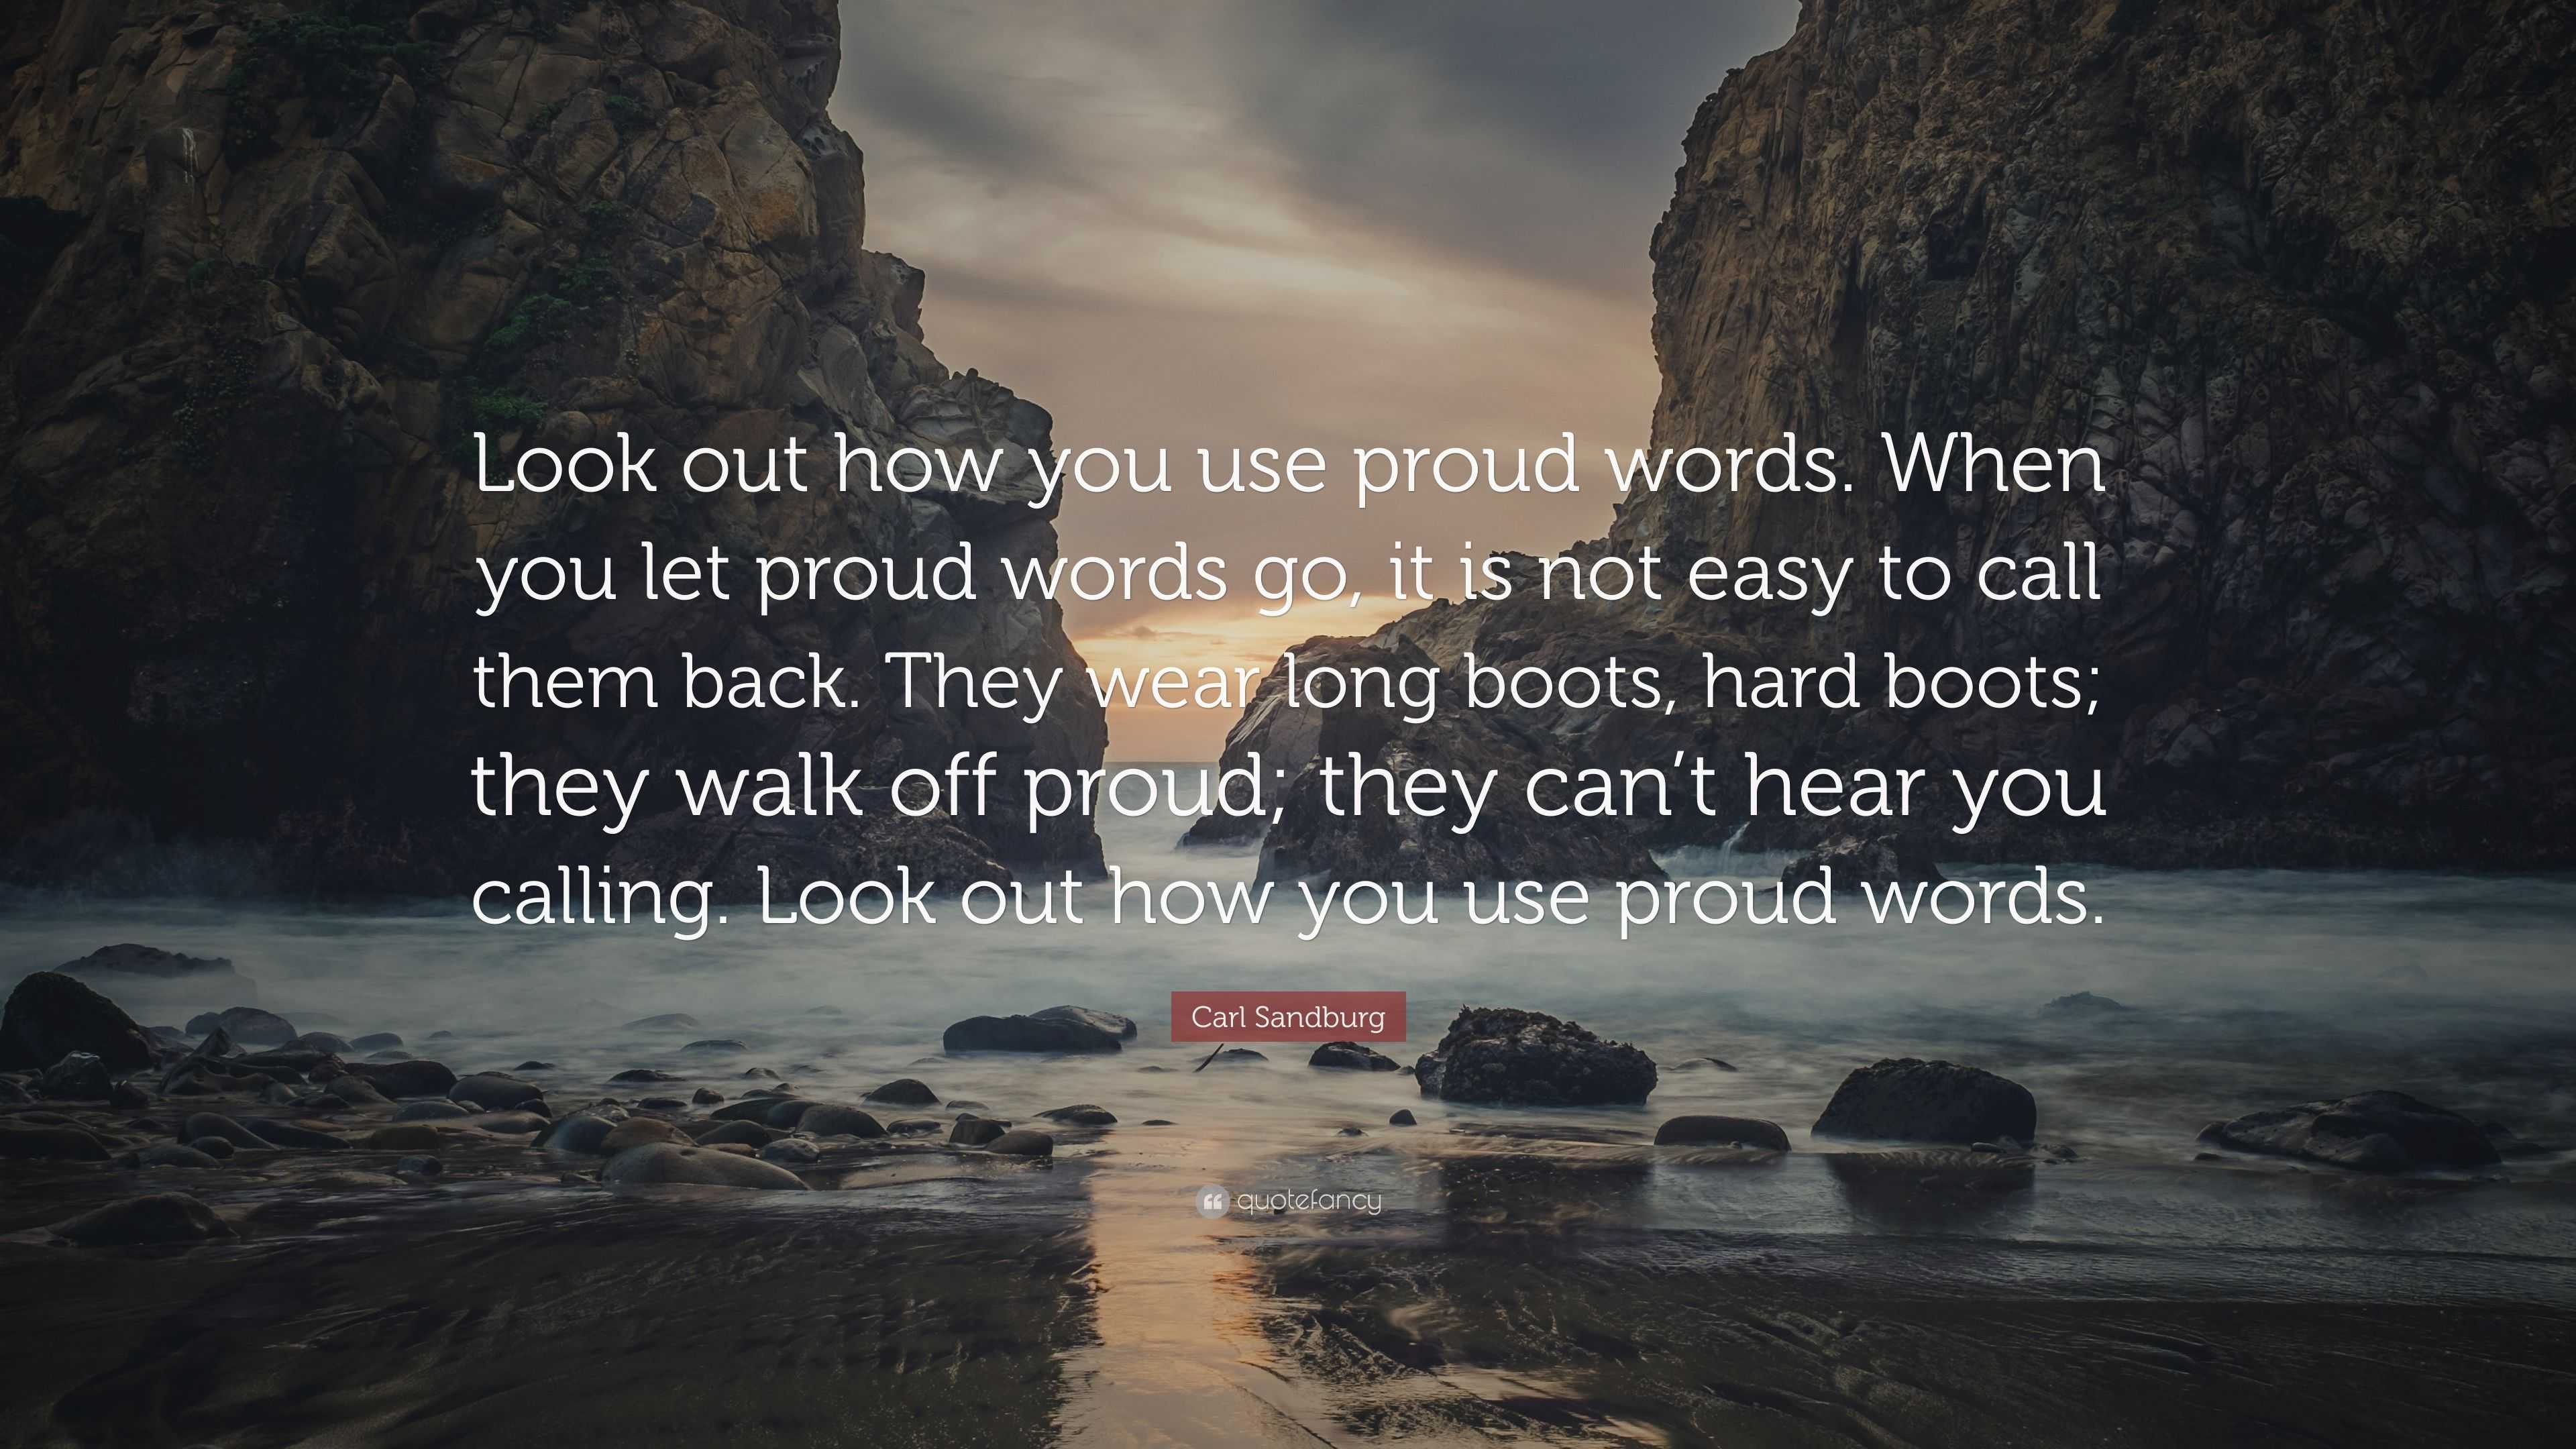 Carl Sandburg Quote: “Look out how you use proud words. When you let